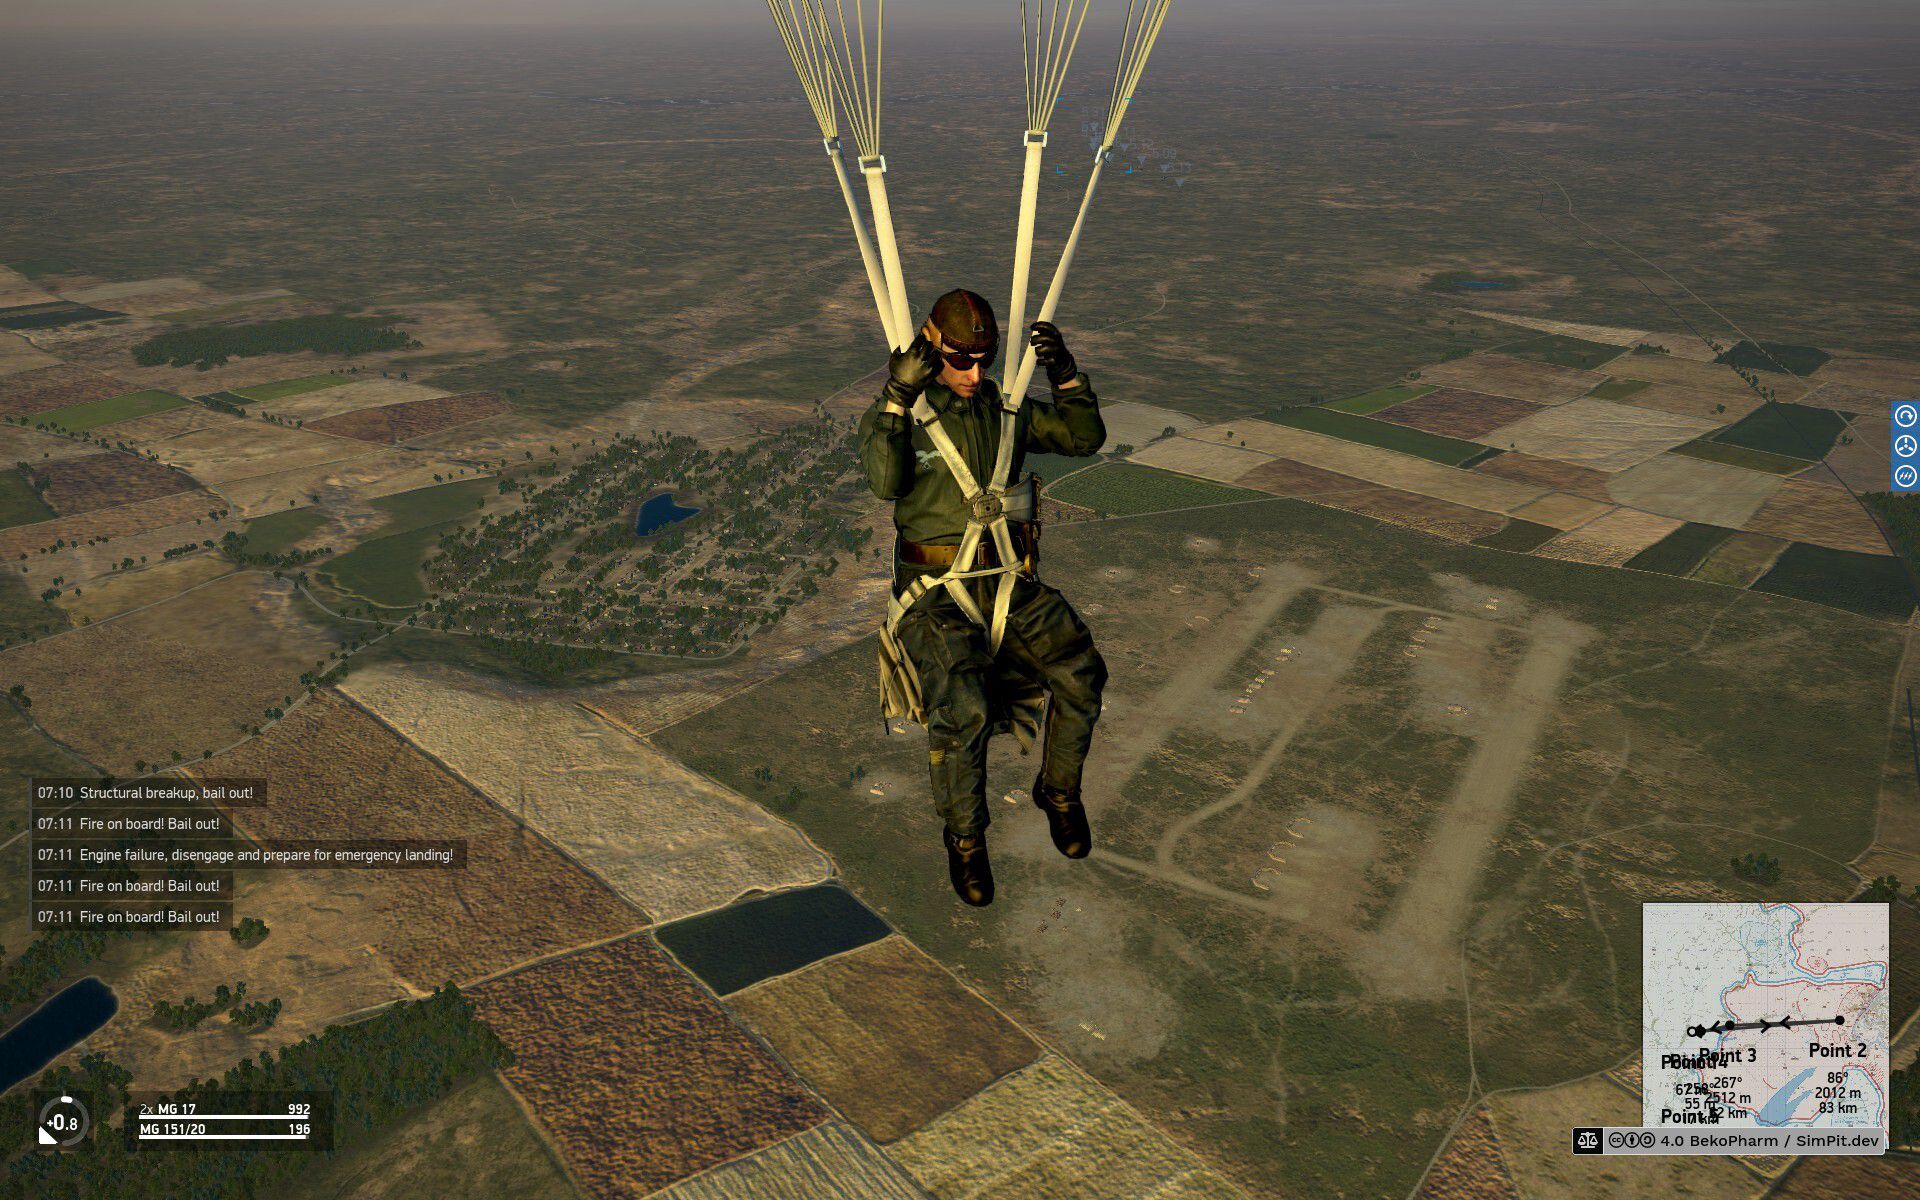 A typical ending of me in IL 2 Sturmovik - parachuting down to the ground